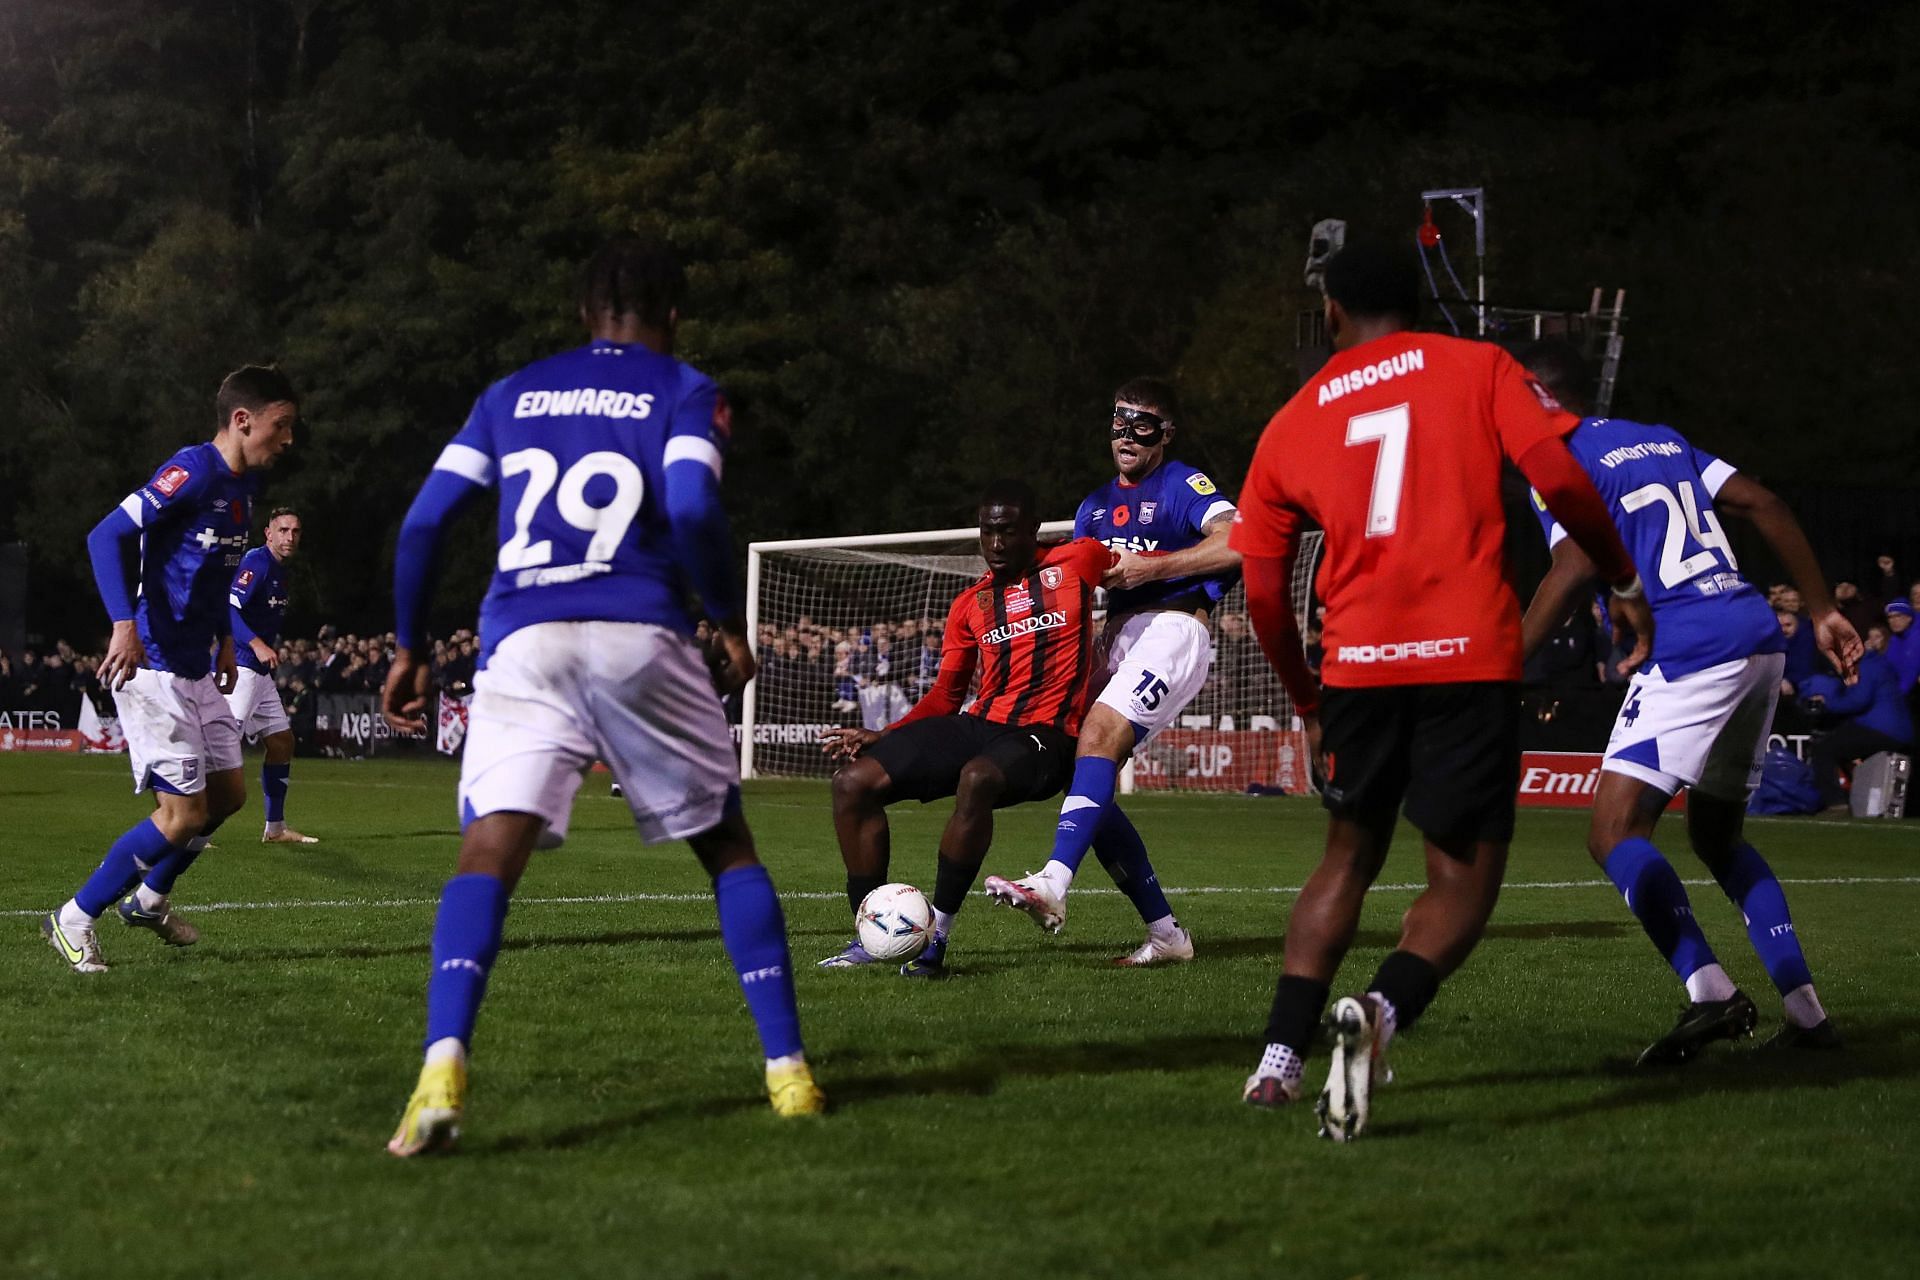 Bracknell Town v Ipswich Town: Emirates FA Cup First Round